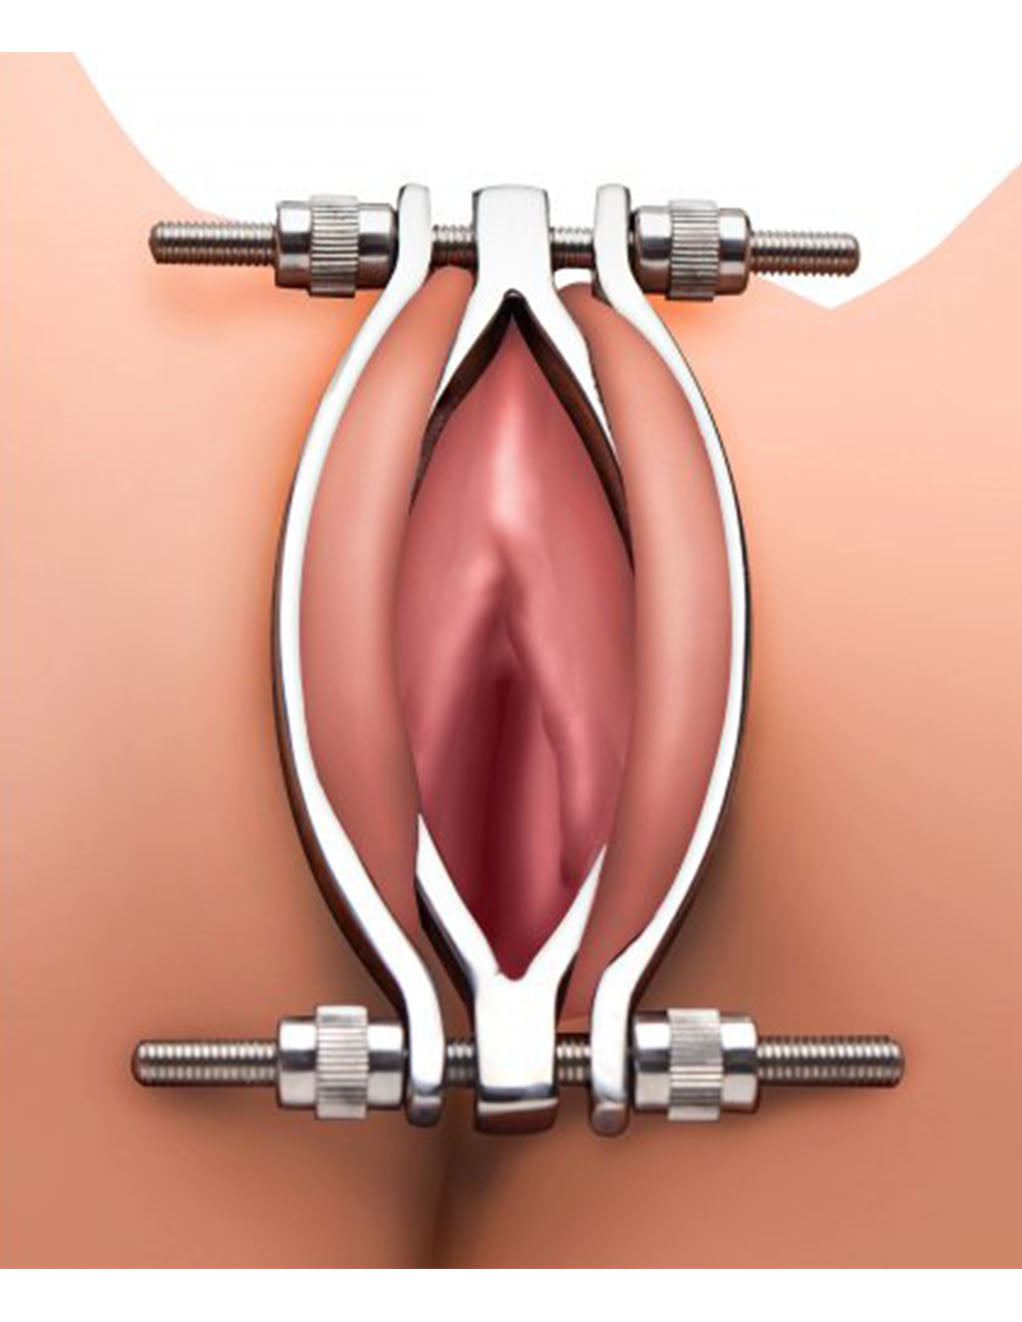 Master Series Stainless Steel Adjustable Pussy Clamp- Diagram